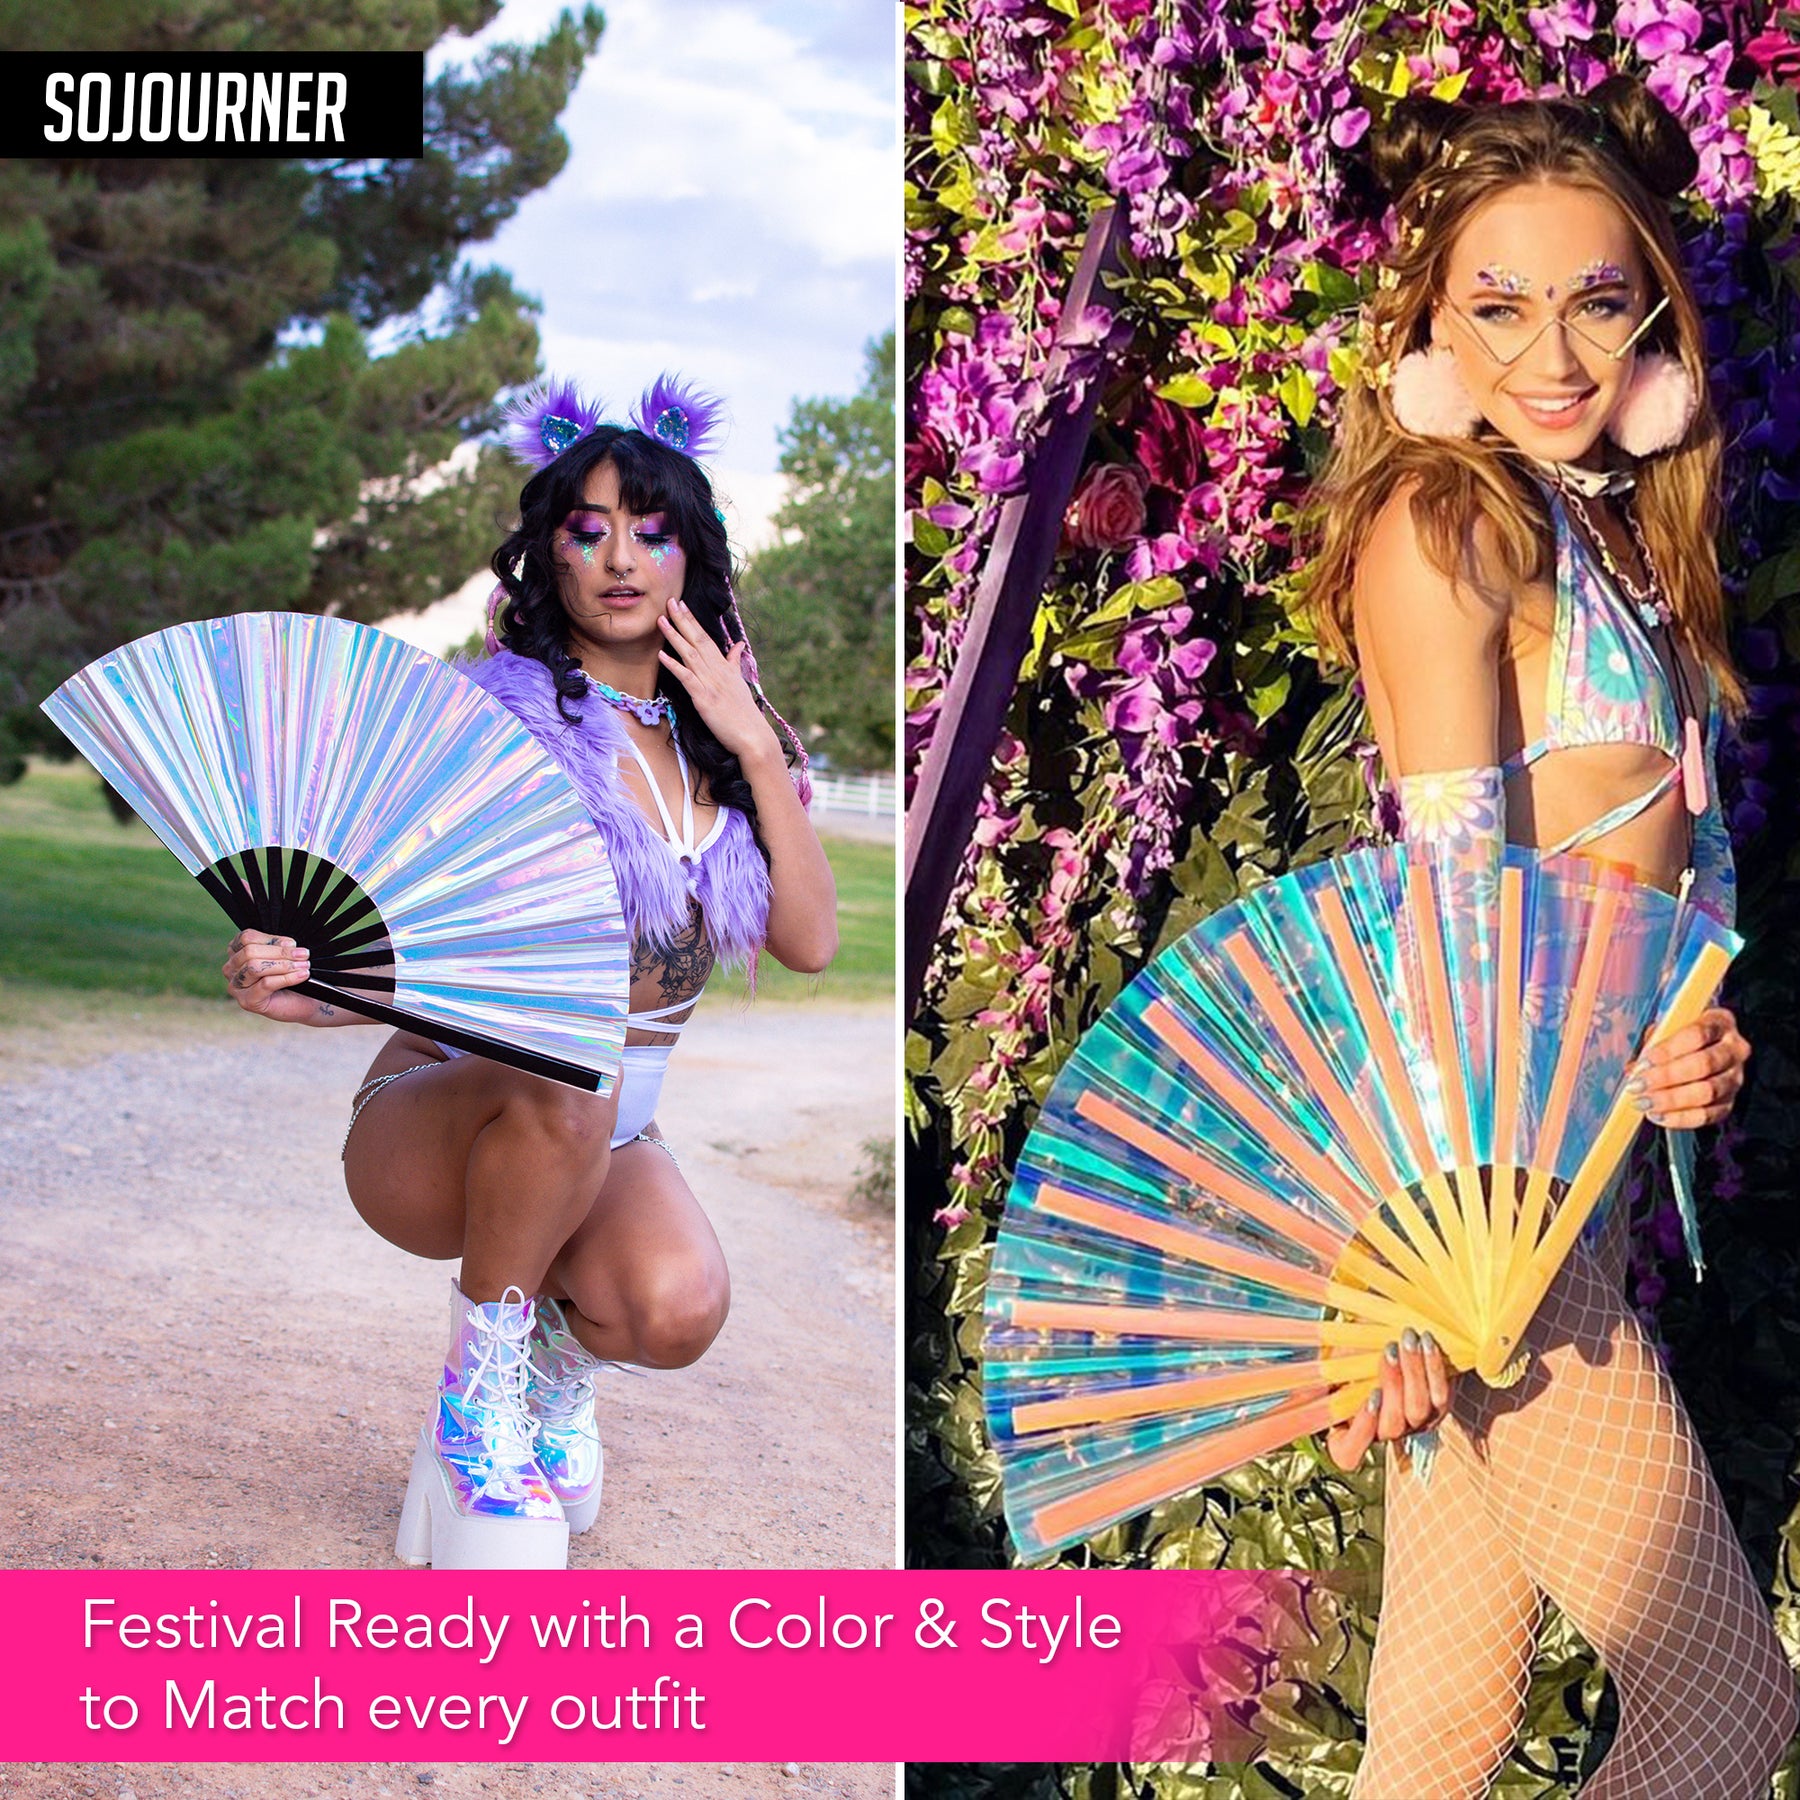 Holographic Rave Fan - Pride Fan and Festival Fan - Large Folding Fan for Festivals (Holographic)